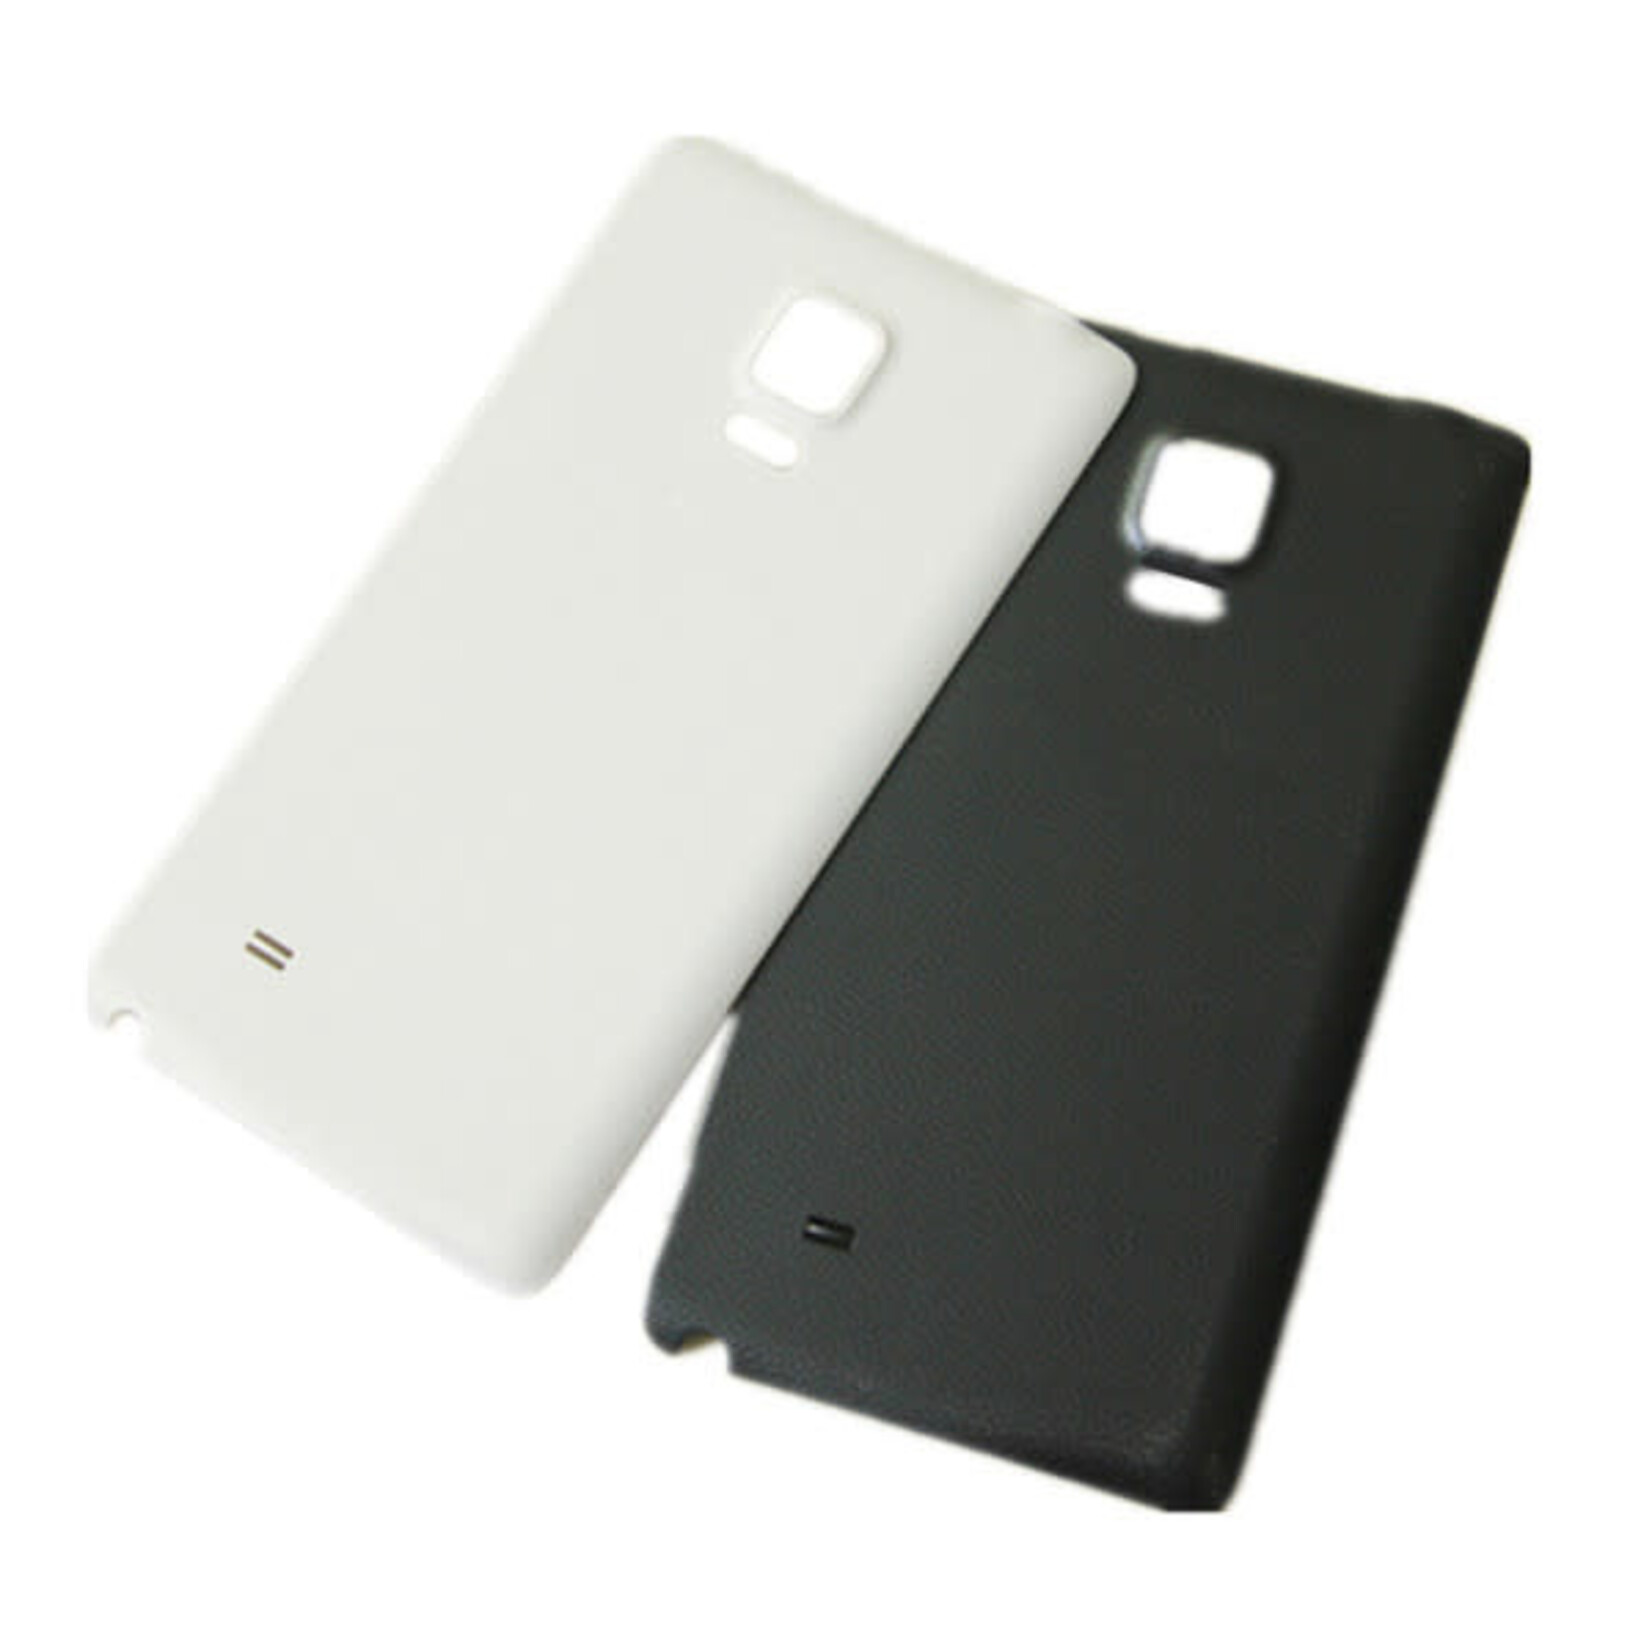 Samsung BACK COVER FOR SAMSUNG GALAXY NOTE 4